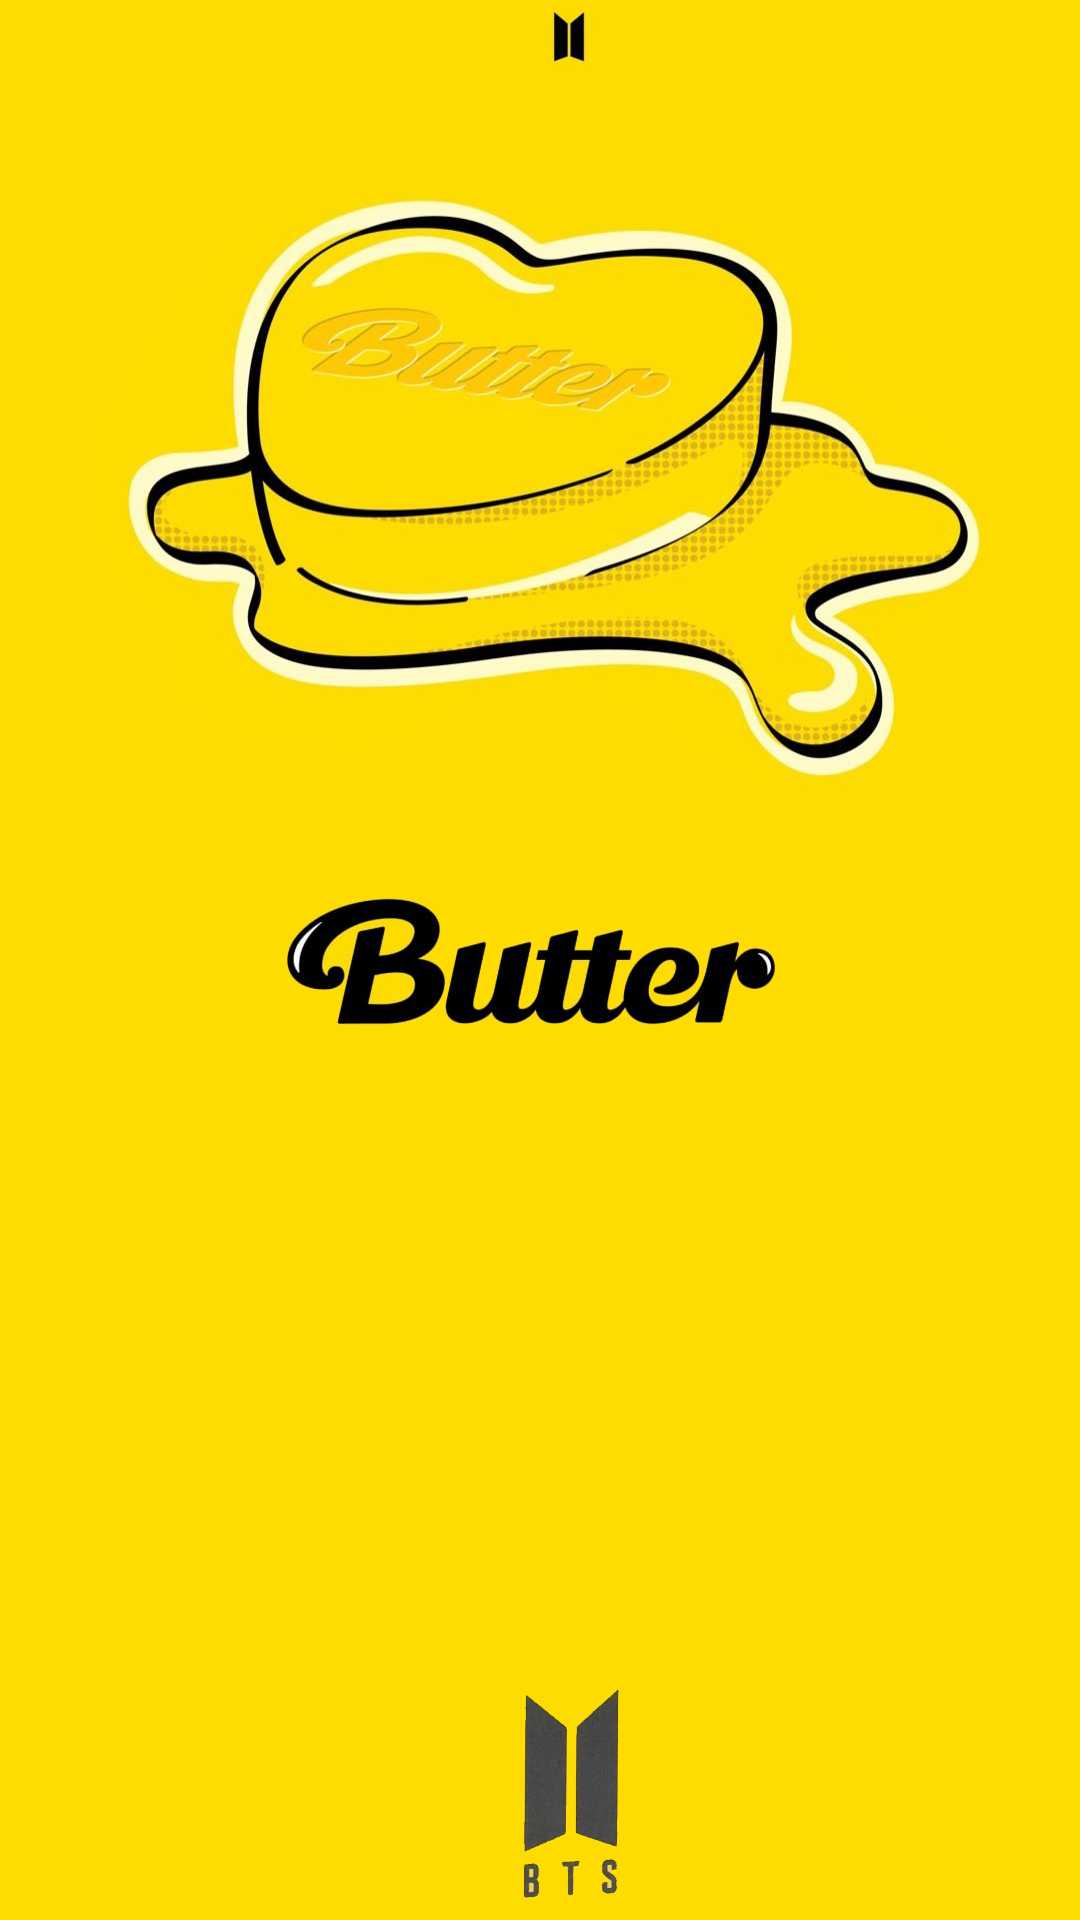 iPhone BTS Butter Wallpaper - KoLPaPer - Awesome Free HD Wallpapers